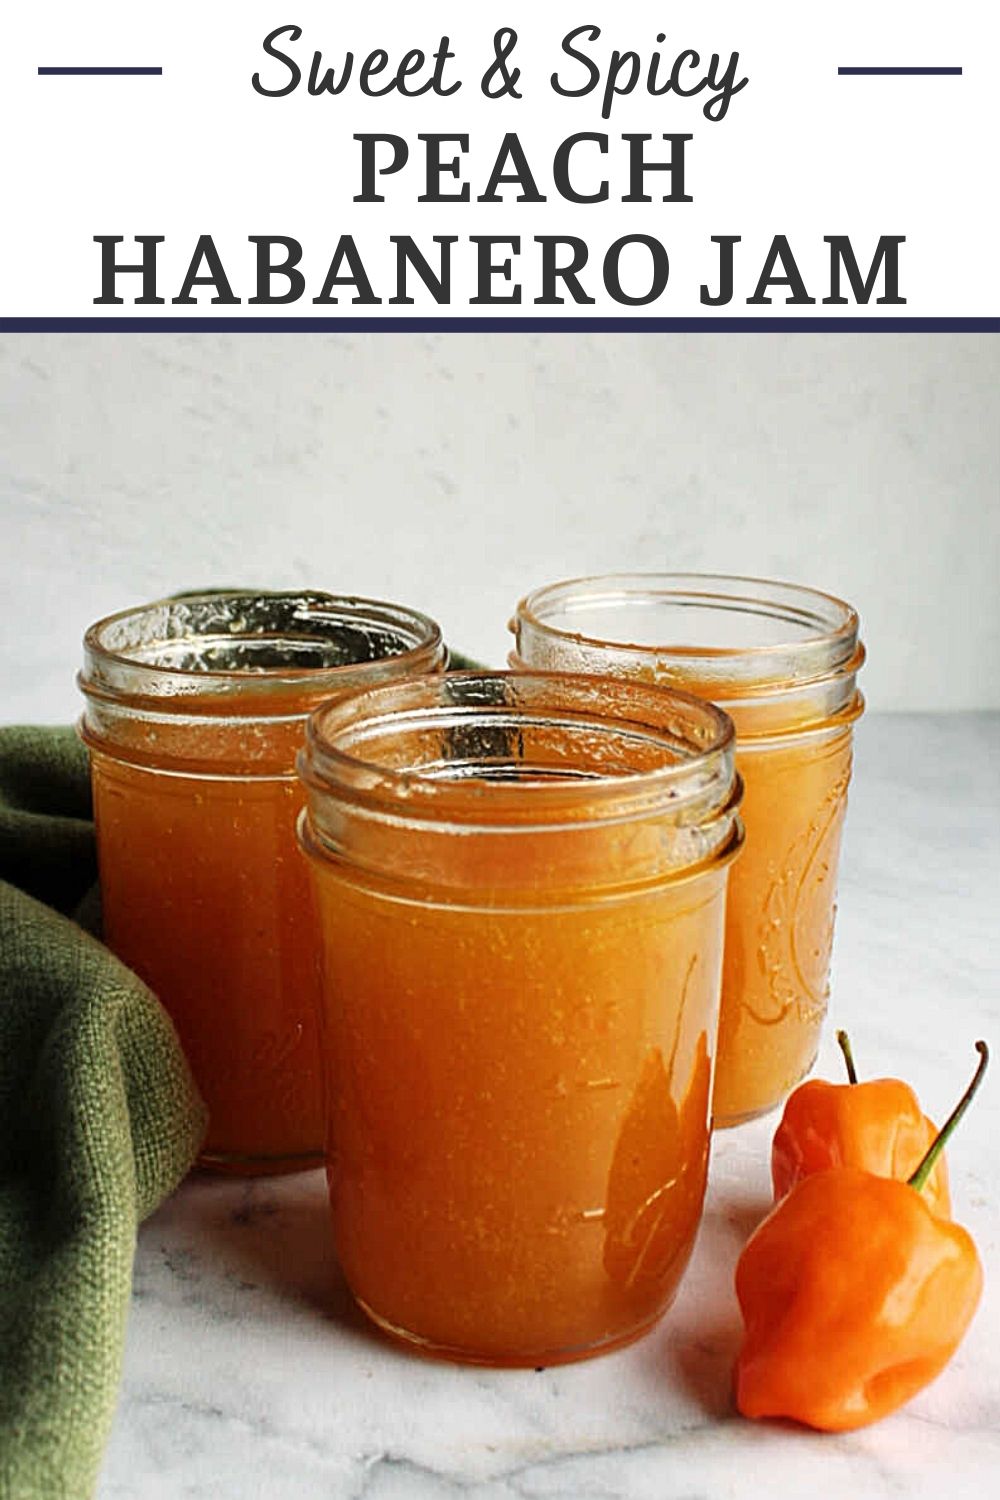 Turn peaches and fruity hot habanero peppers into a delicious sweet and spicy preserves. It is perfect on wings or with cream cheese and crackers.